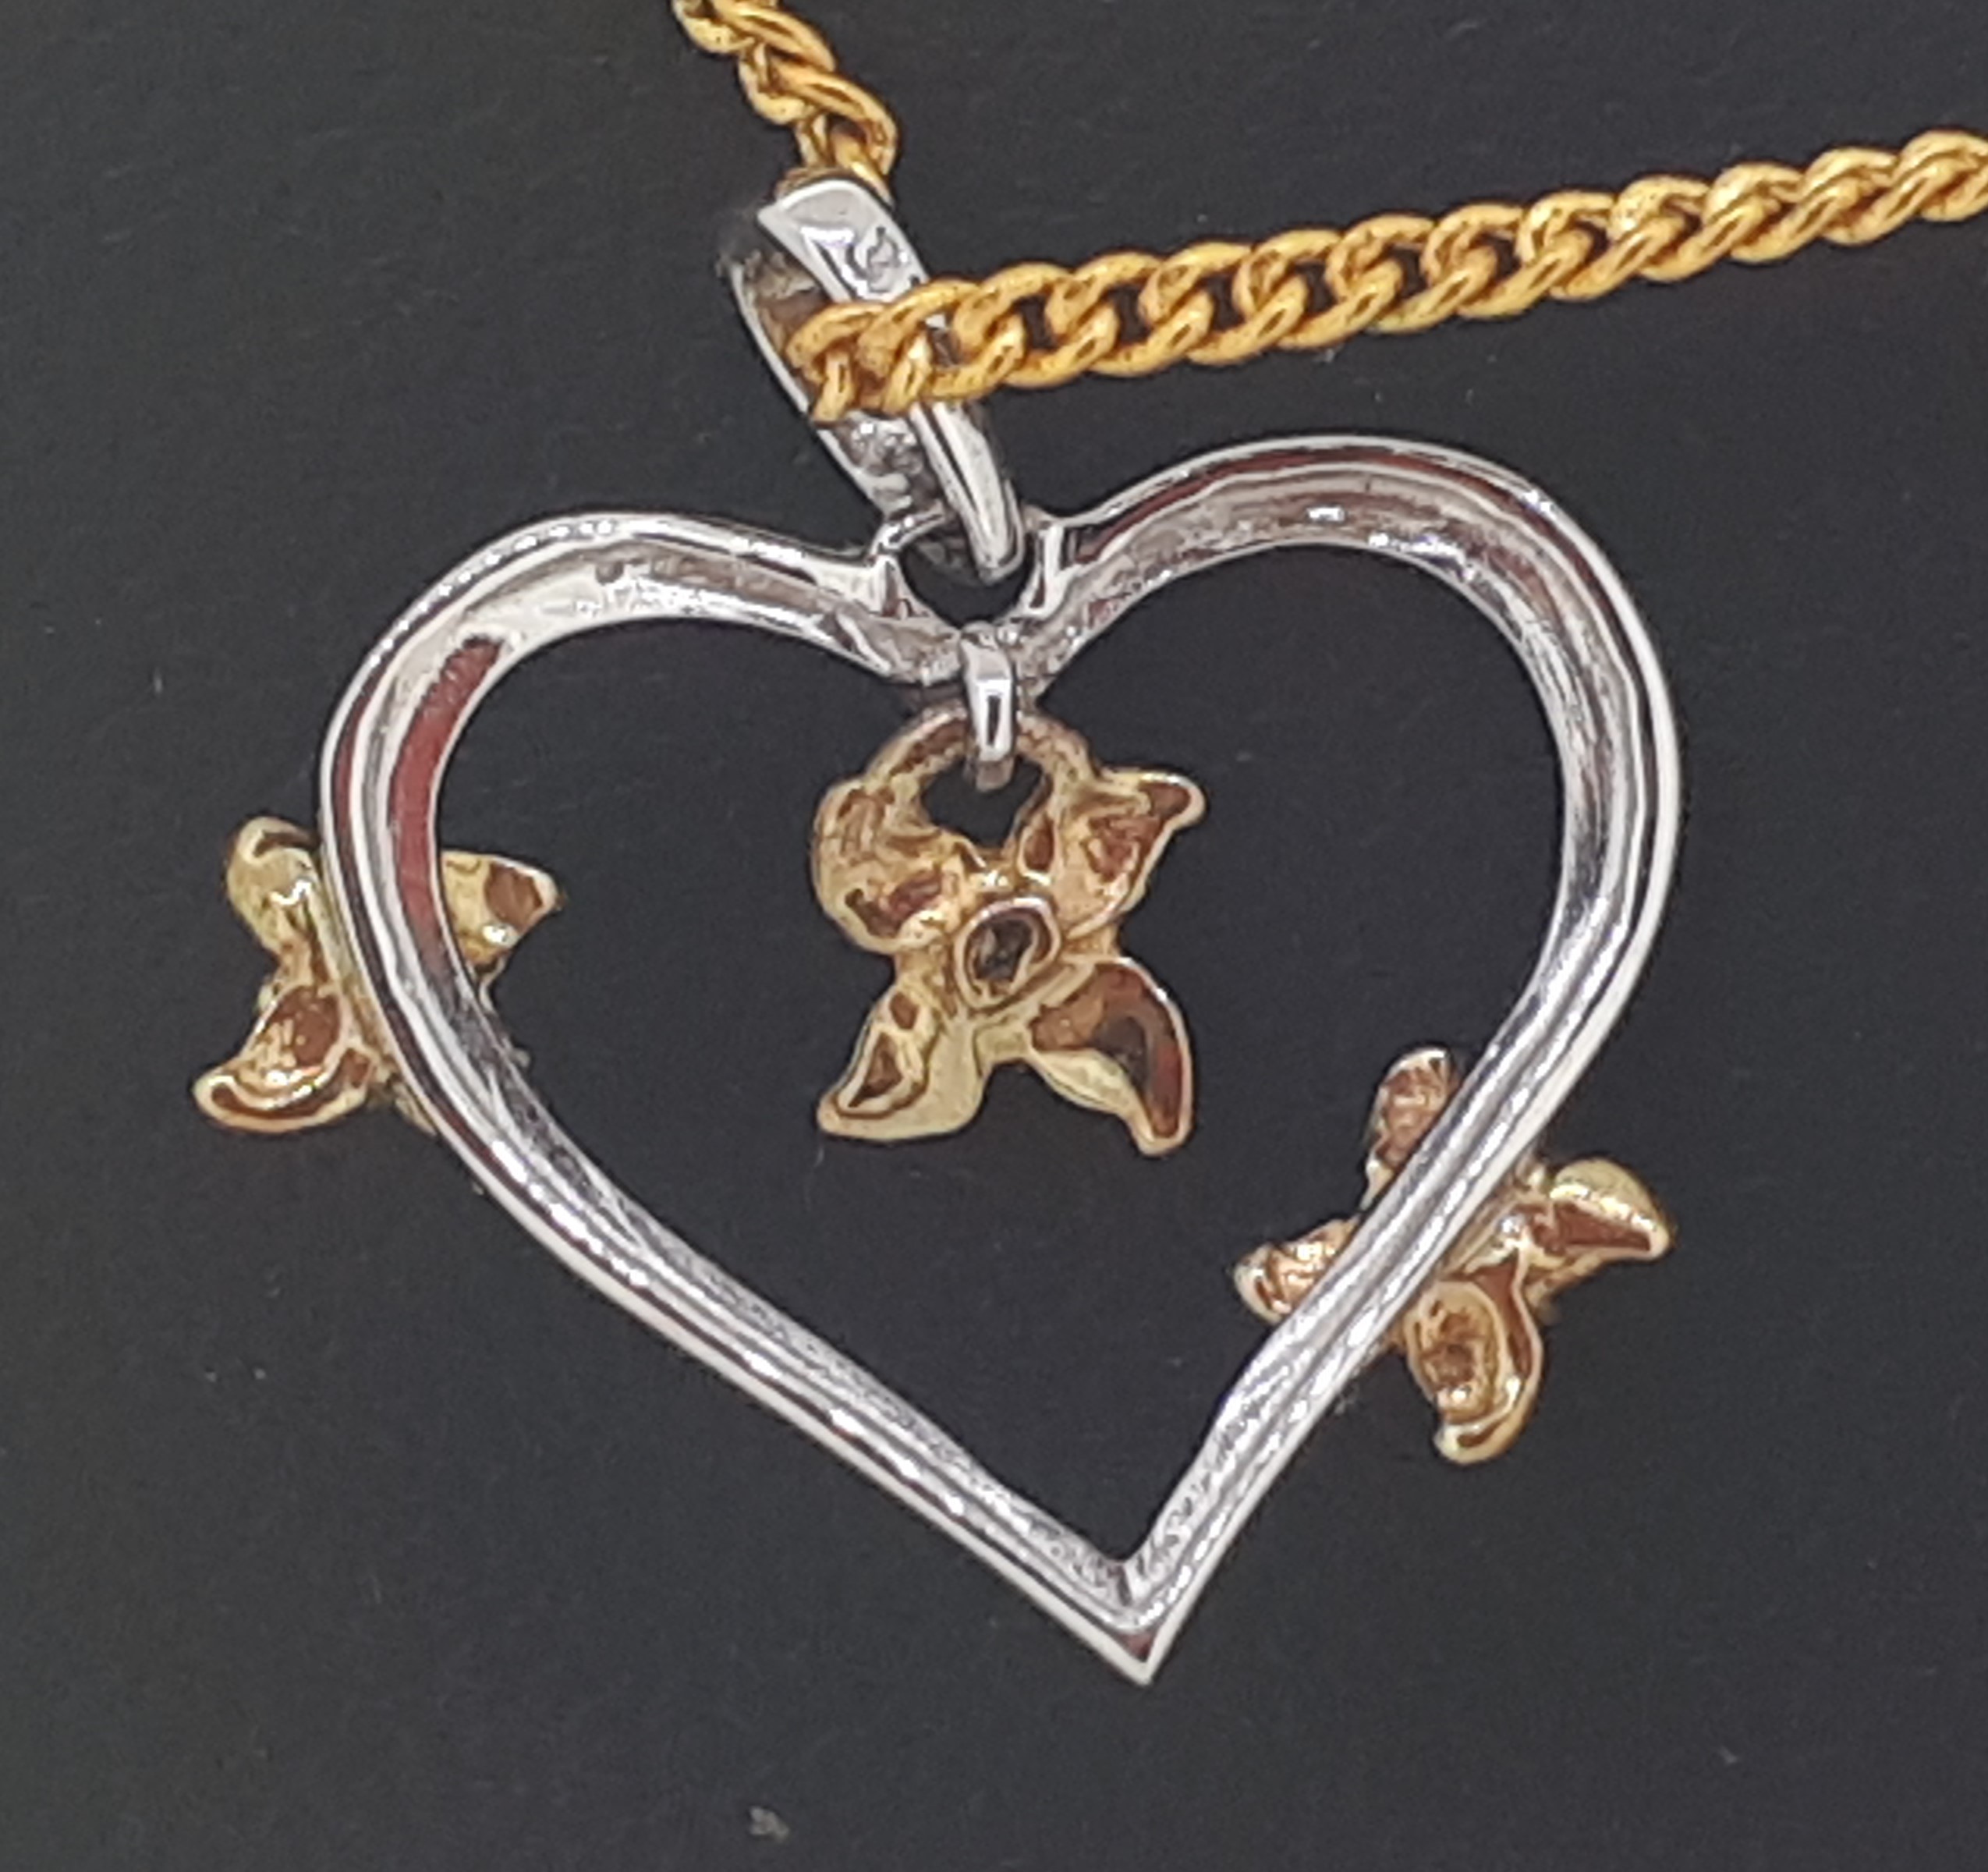 9ct (375) White and Yellow Gold Open Heart Diamond Pendant - Image 2 of 2